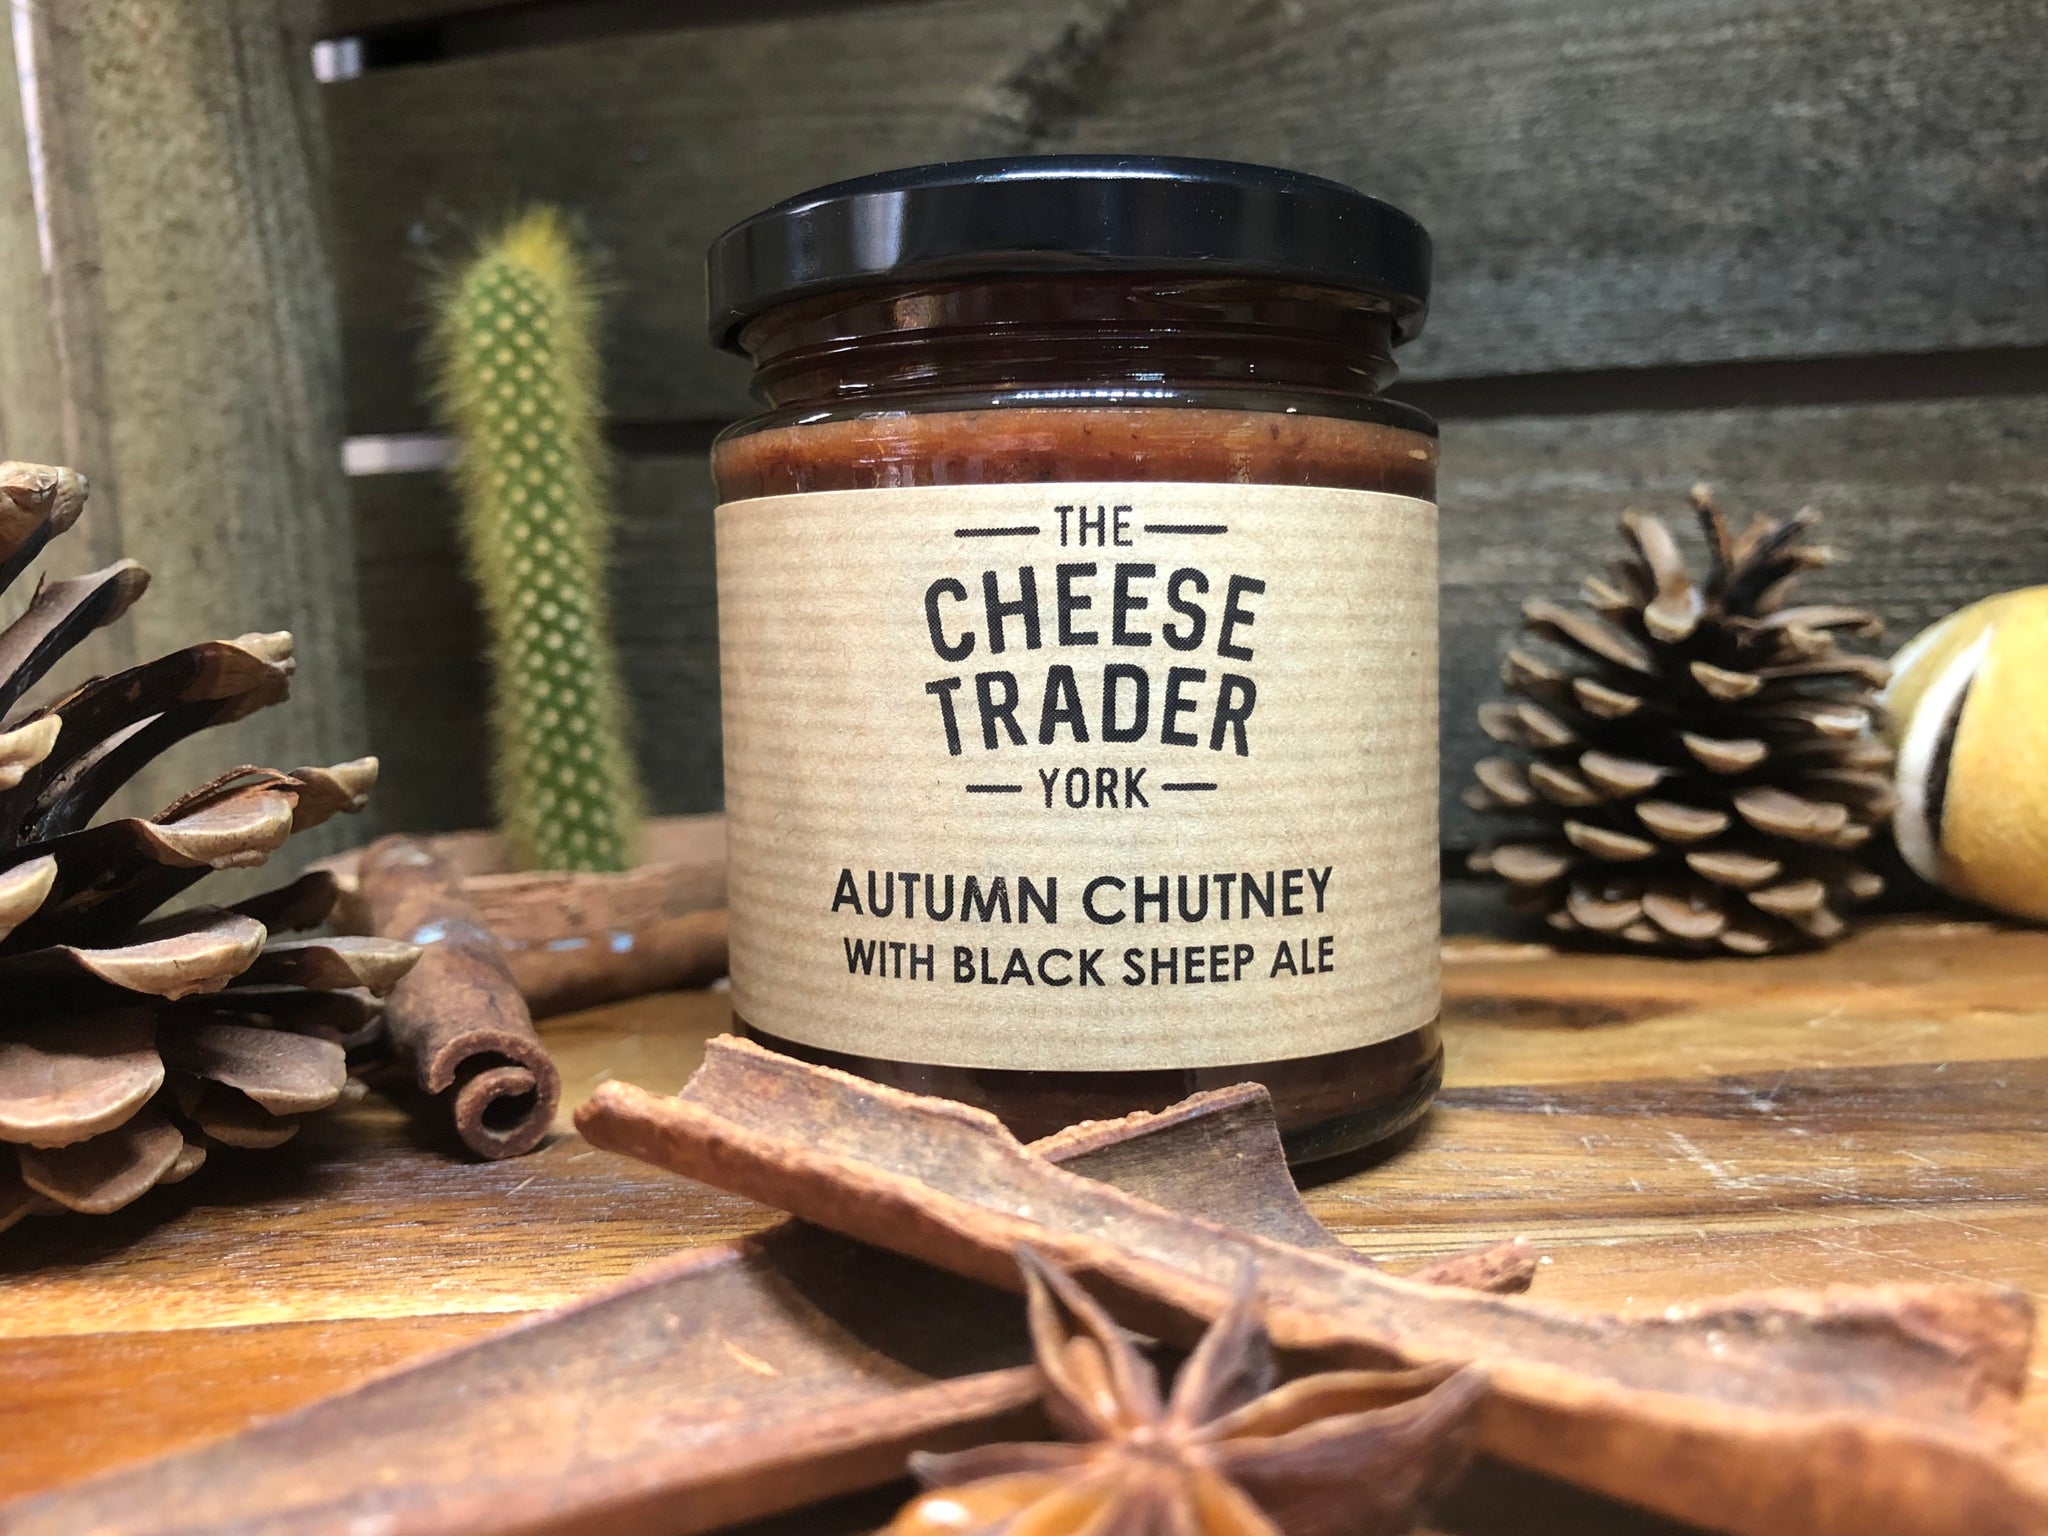 THE CHEESE TRADER'S AUTUMN CHUTNEY WITH BLACK SHEEP ALE.